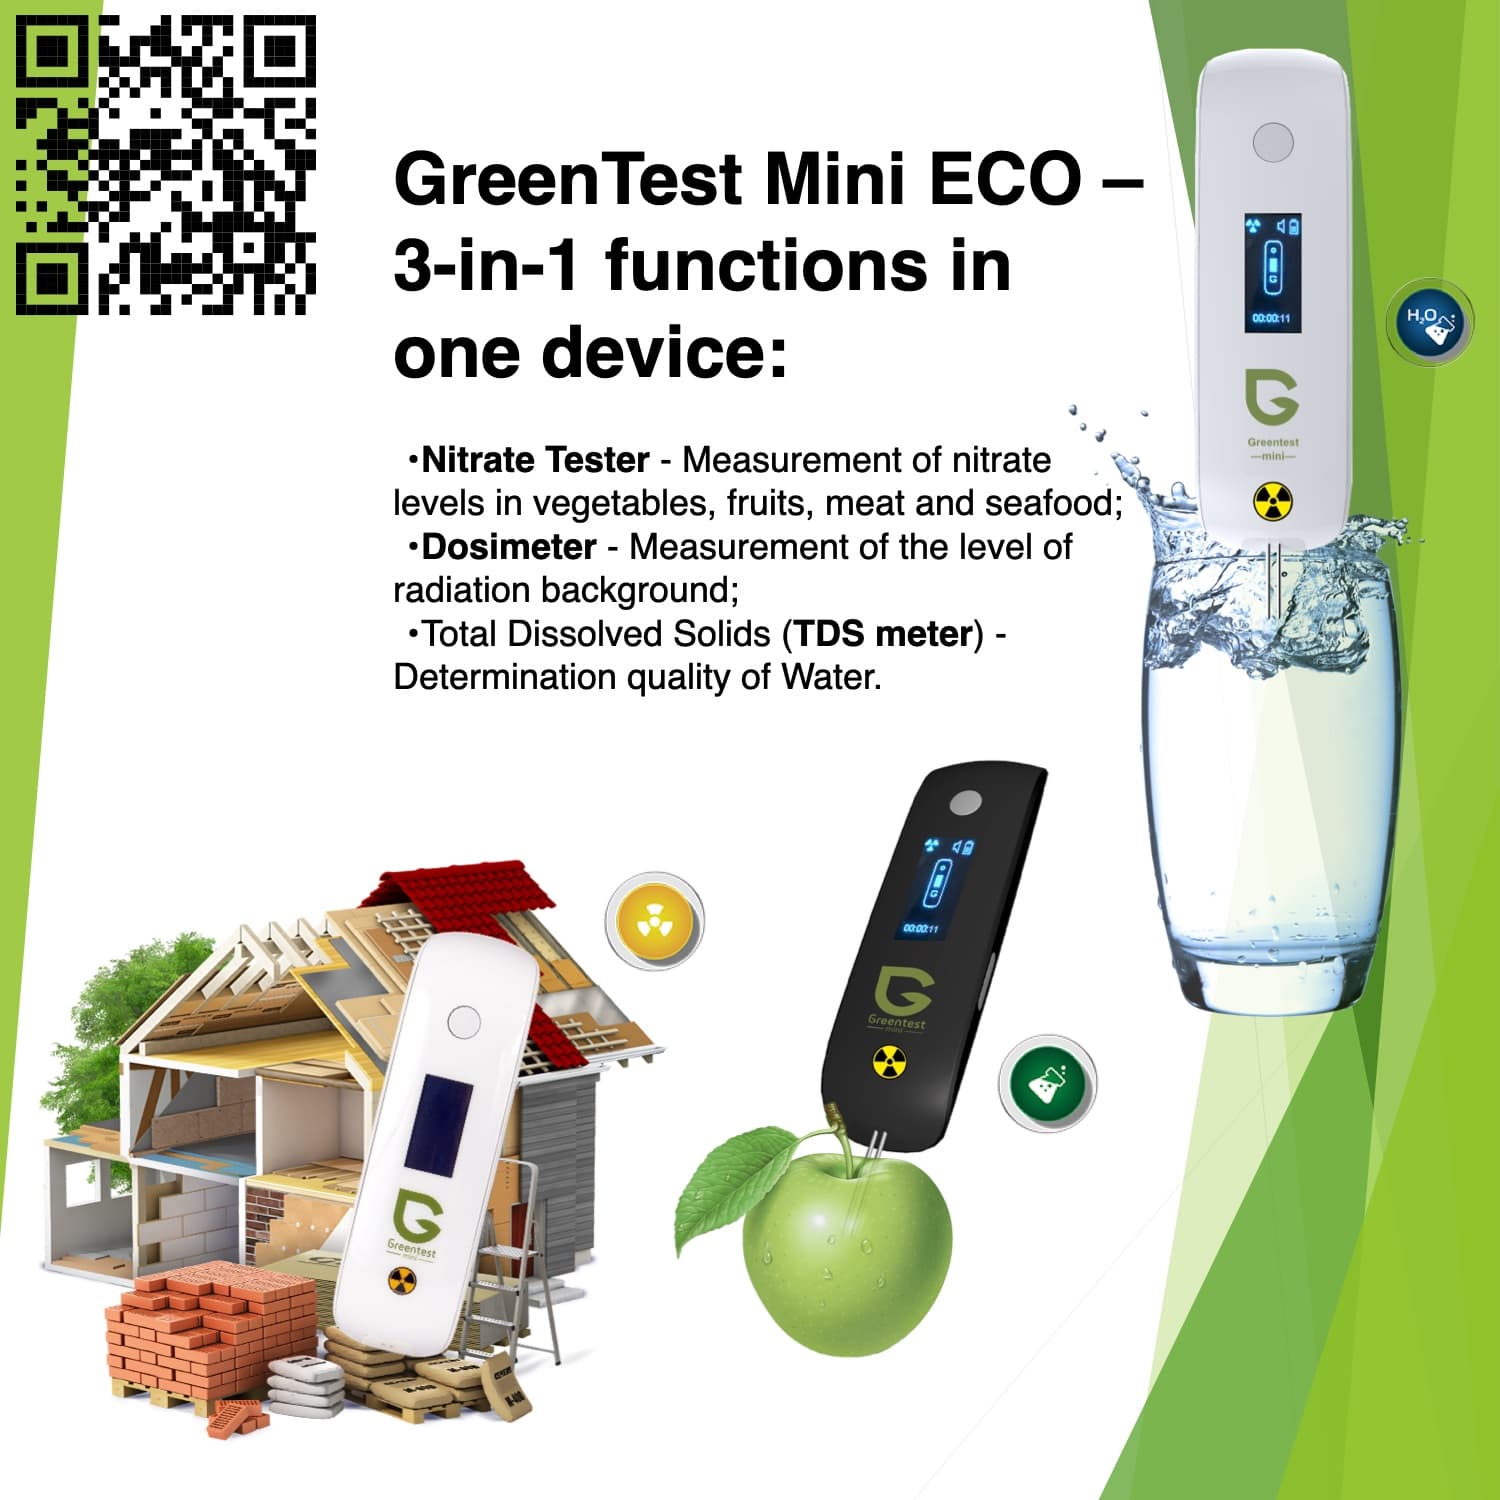 GreenTest Mini ECO - small portable Nitrate, Water and Radiation detector